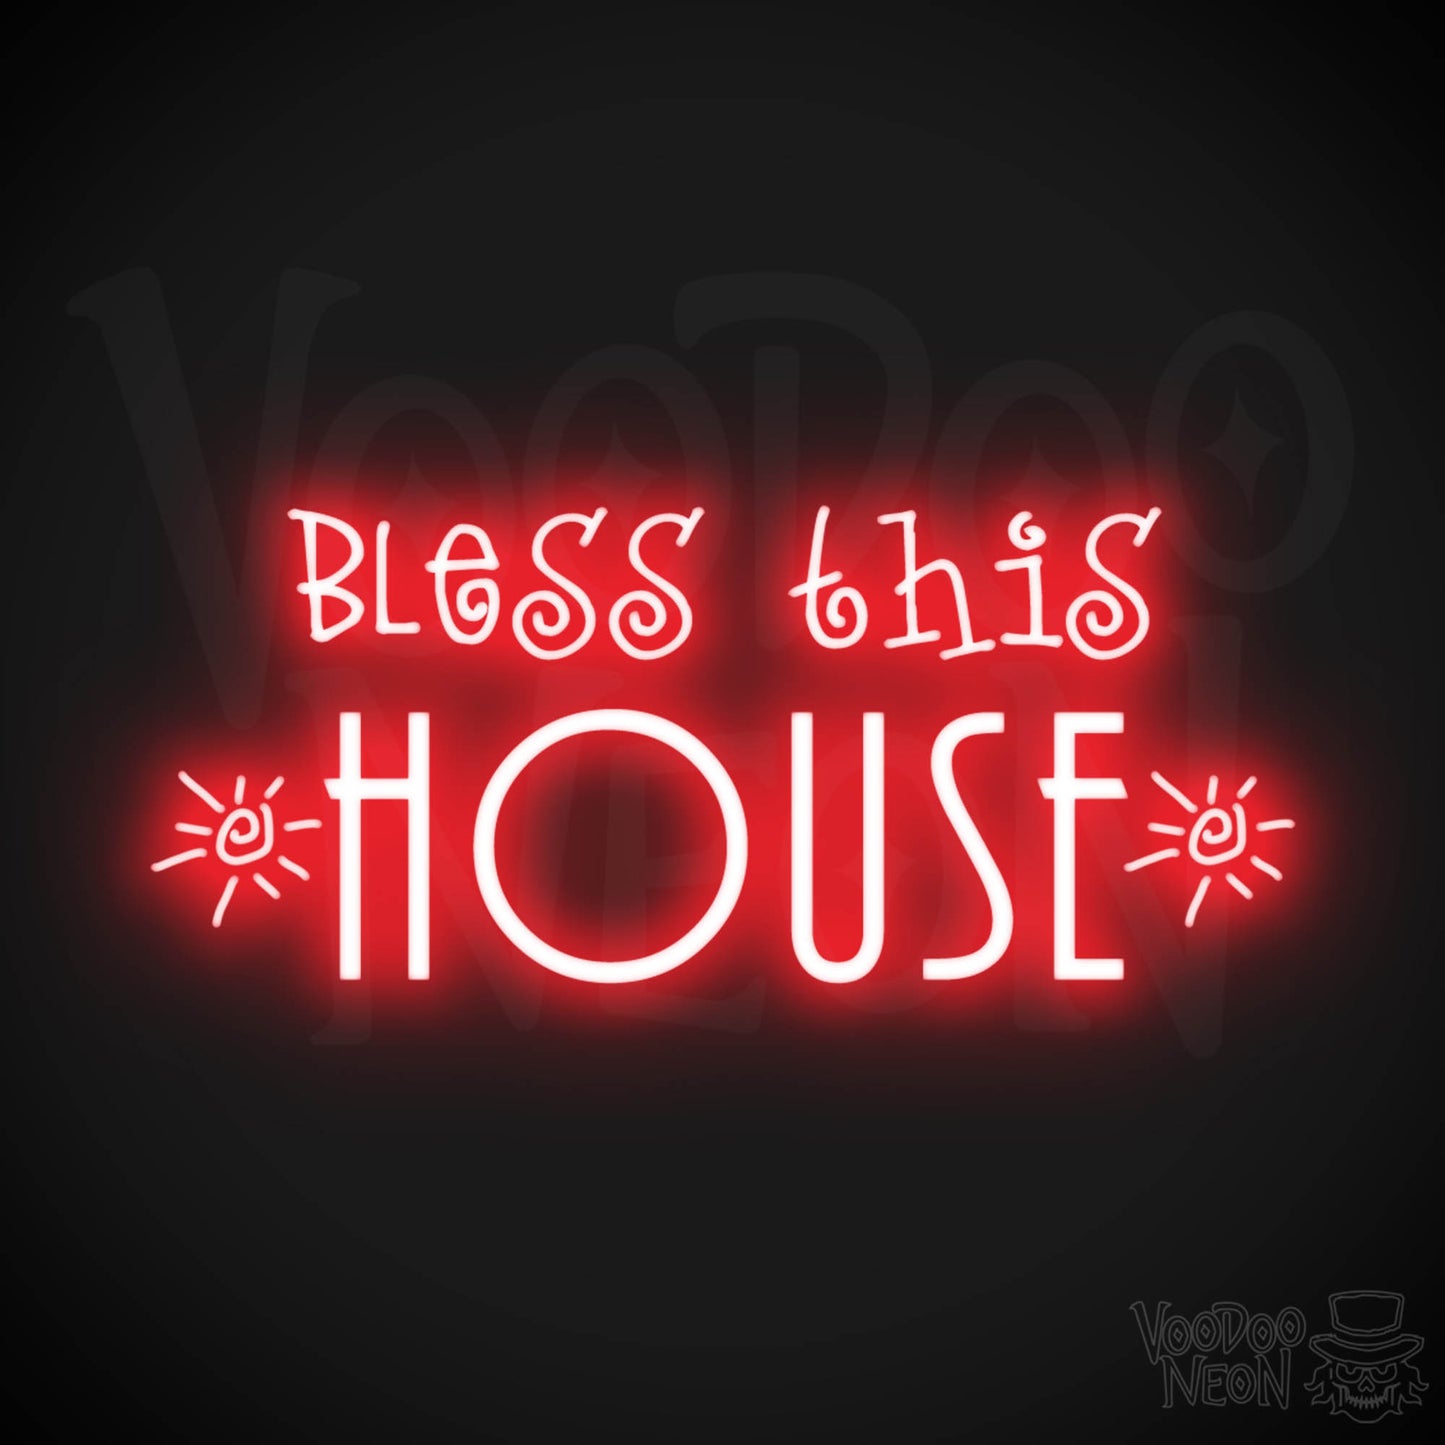 Bless This House Neon Sign - Neon Bless This House Sign - LED Light Up Sign - Color Red